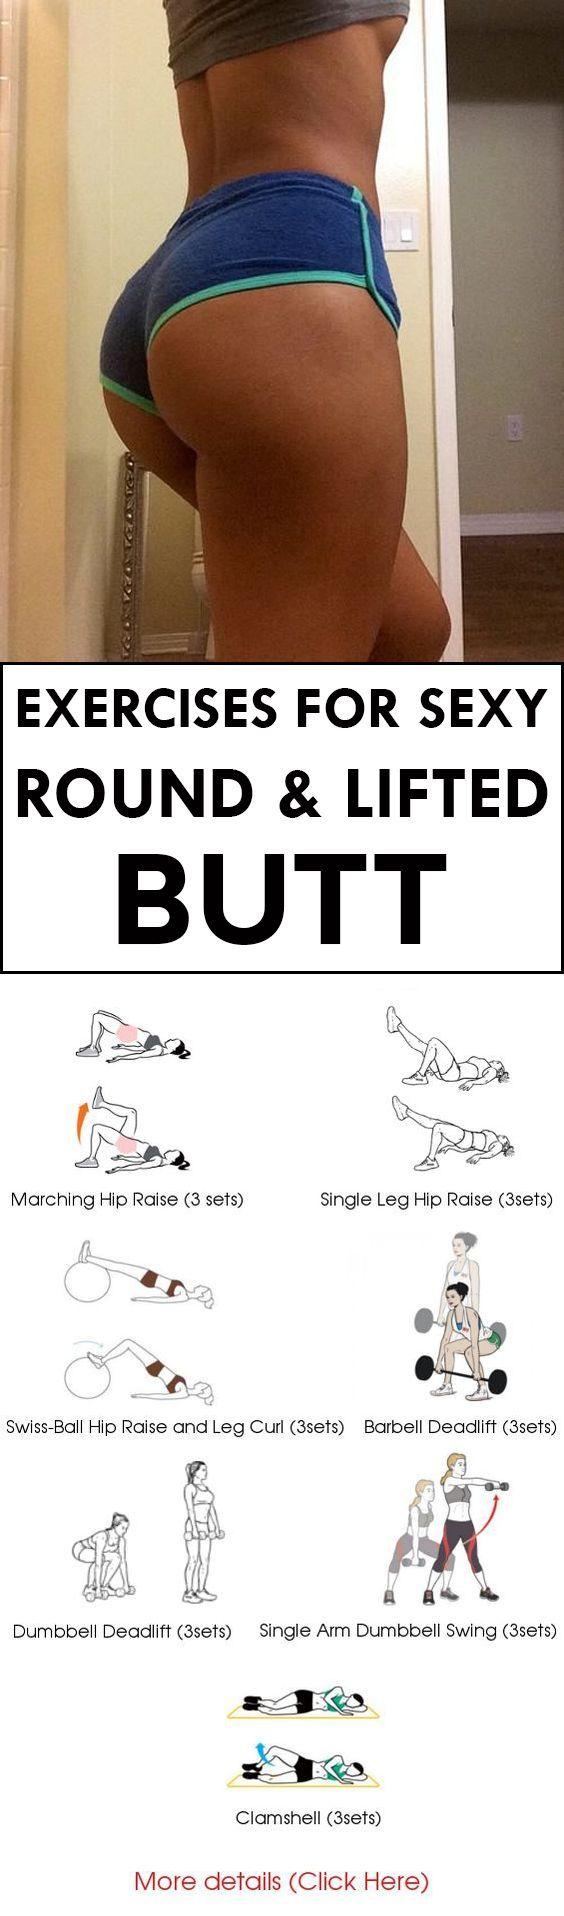 best of Butt a Exercieses for sexy